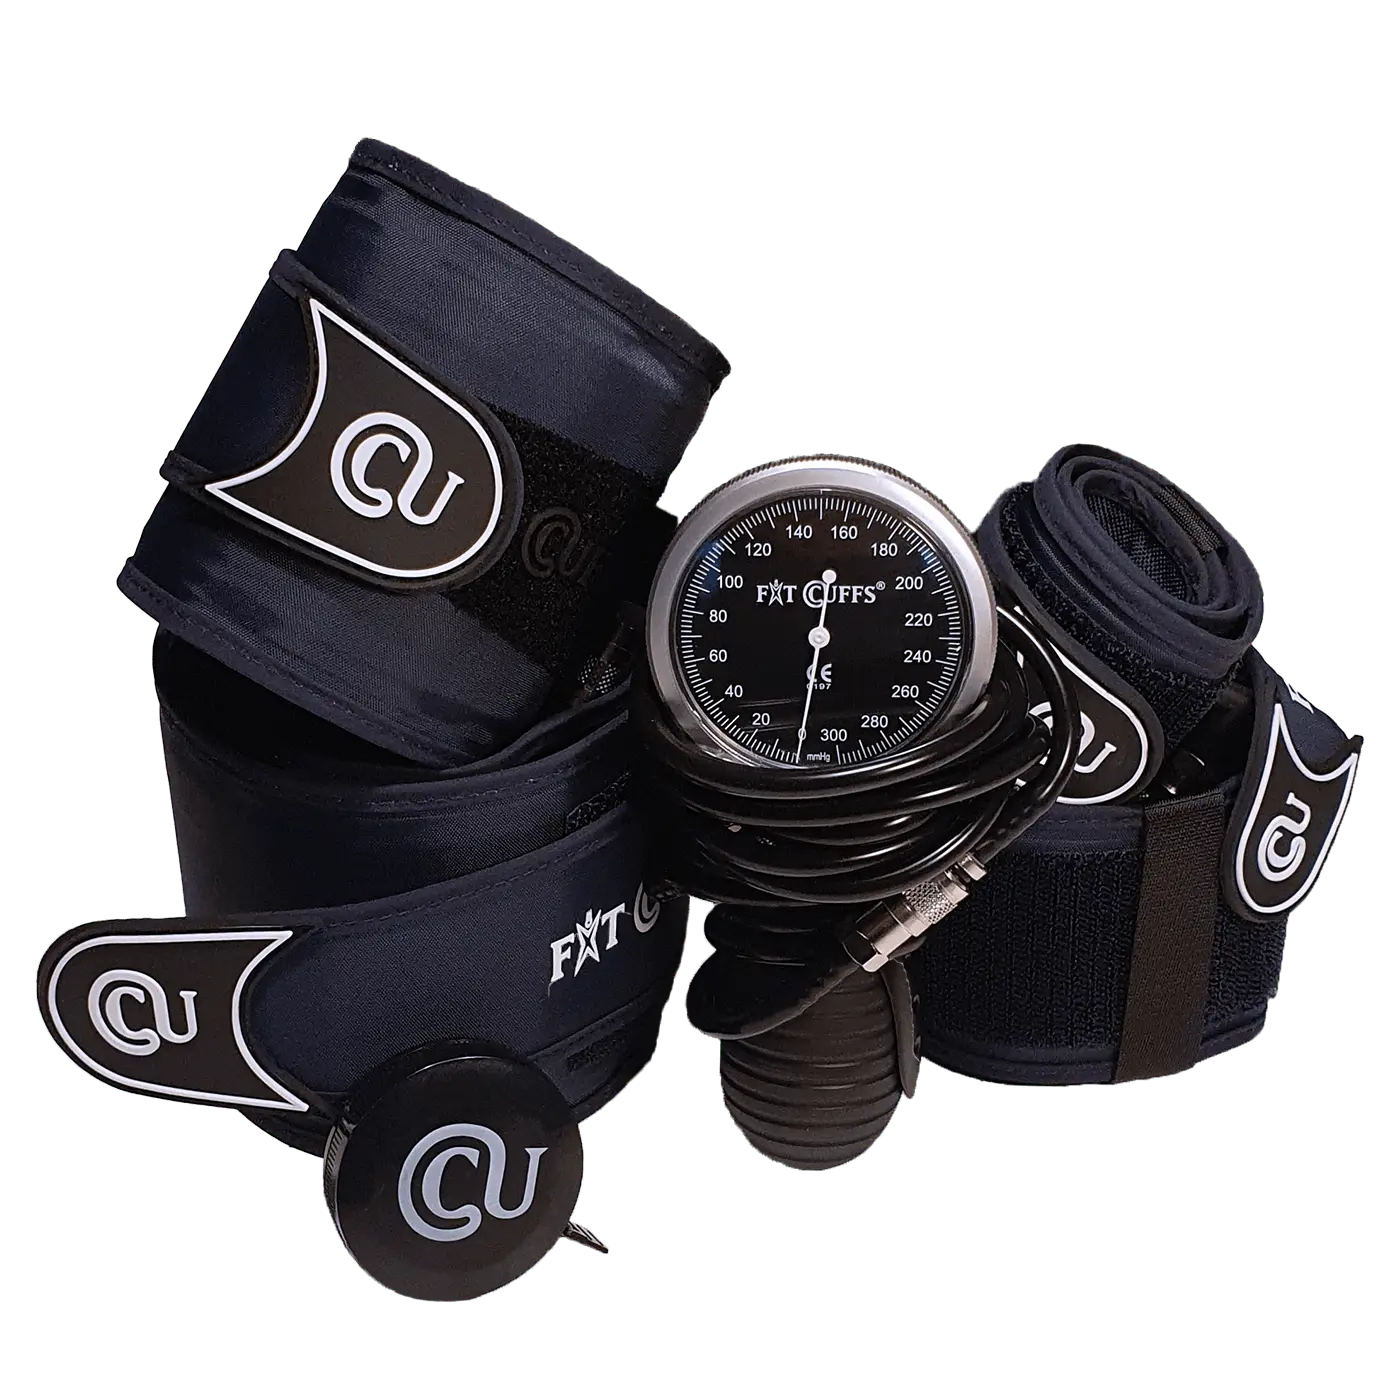 Se Fit Cuffs - Complete (One Size Fits All) - Fit Manometer Wireless hos Fitcuffs.com